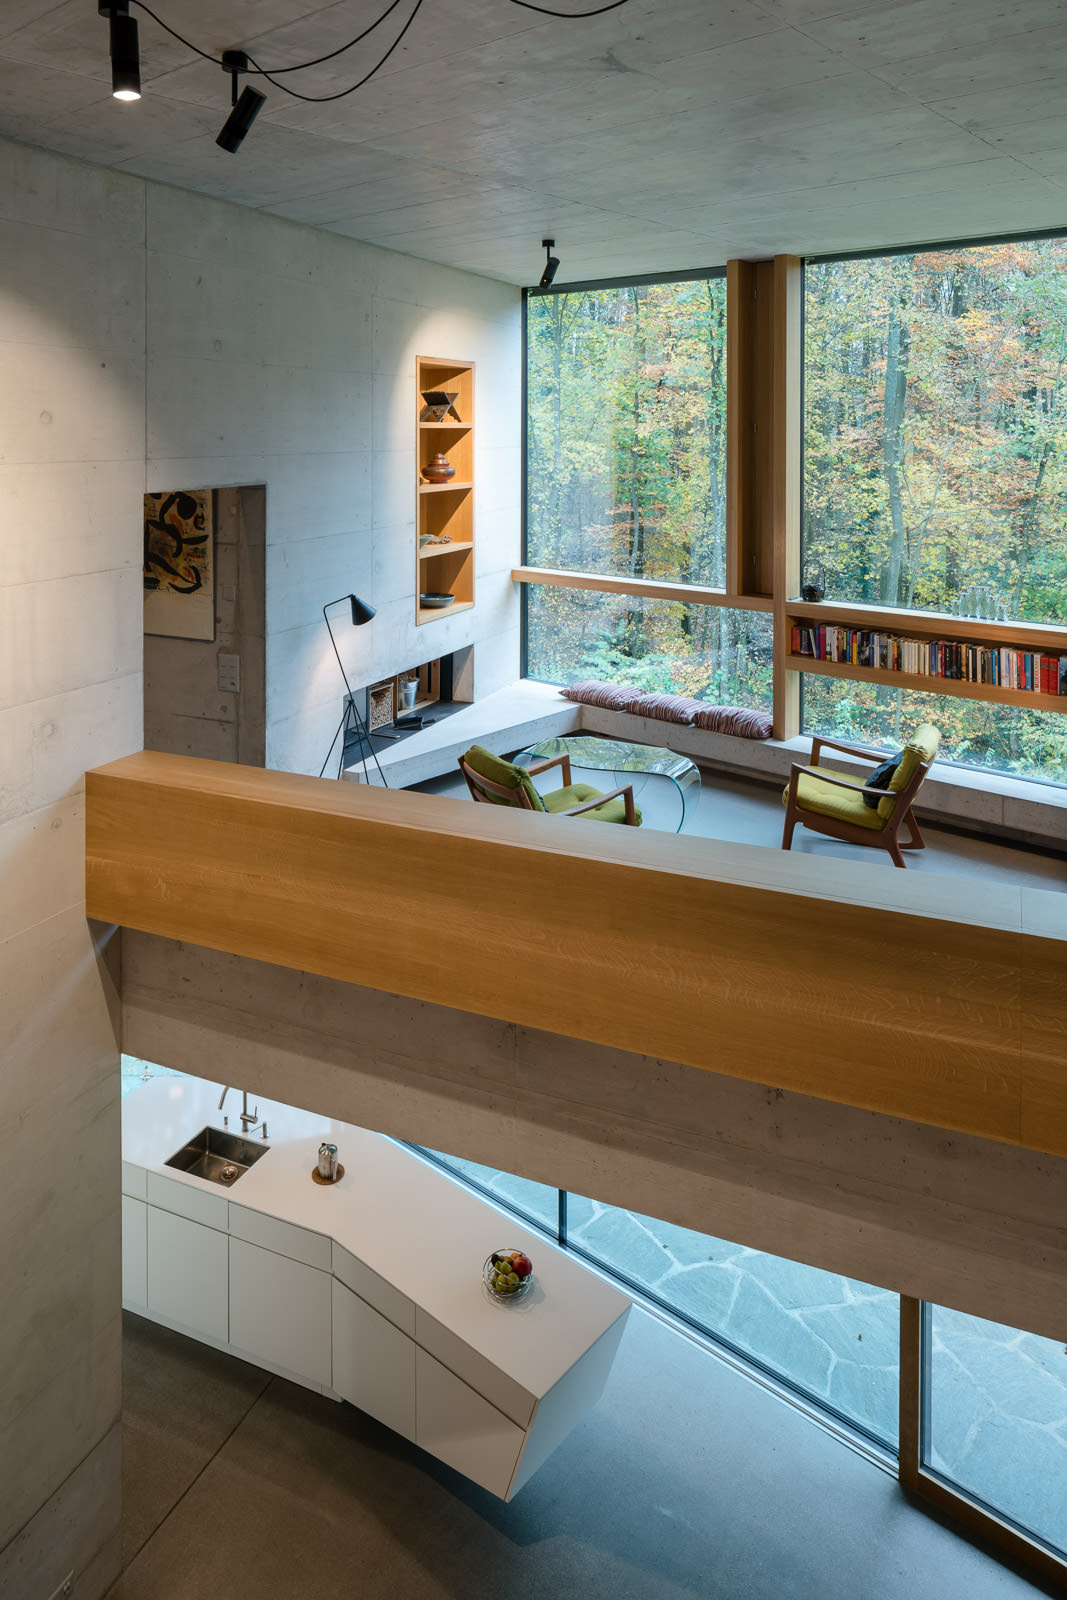 Living room and kitchen of casa forest with forest view. Architectural Photography